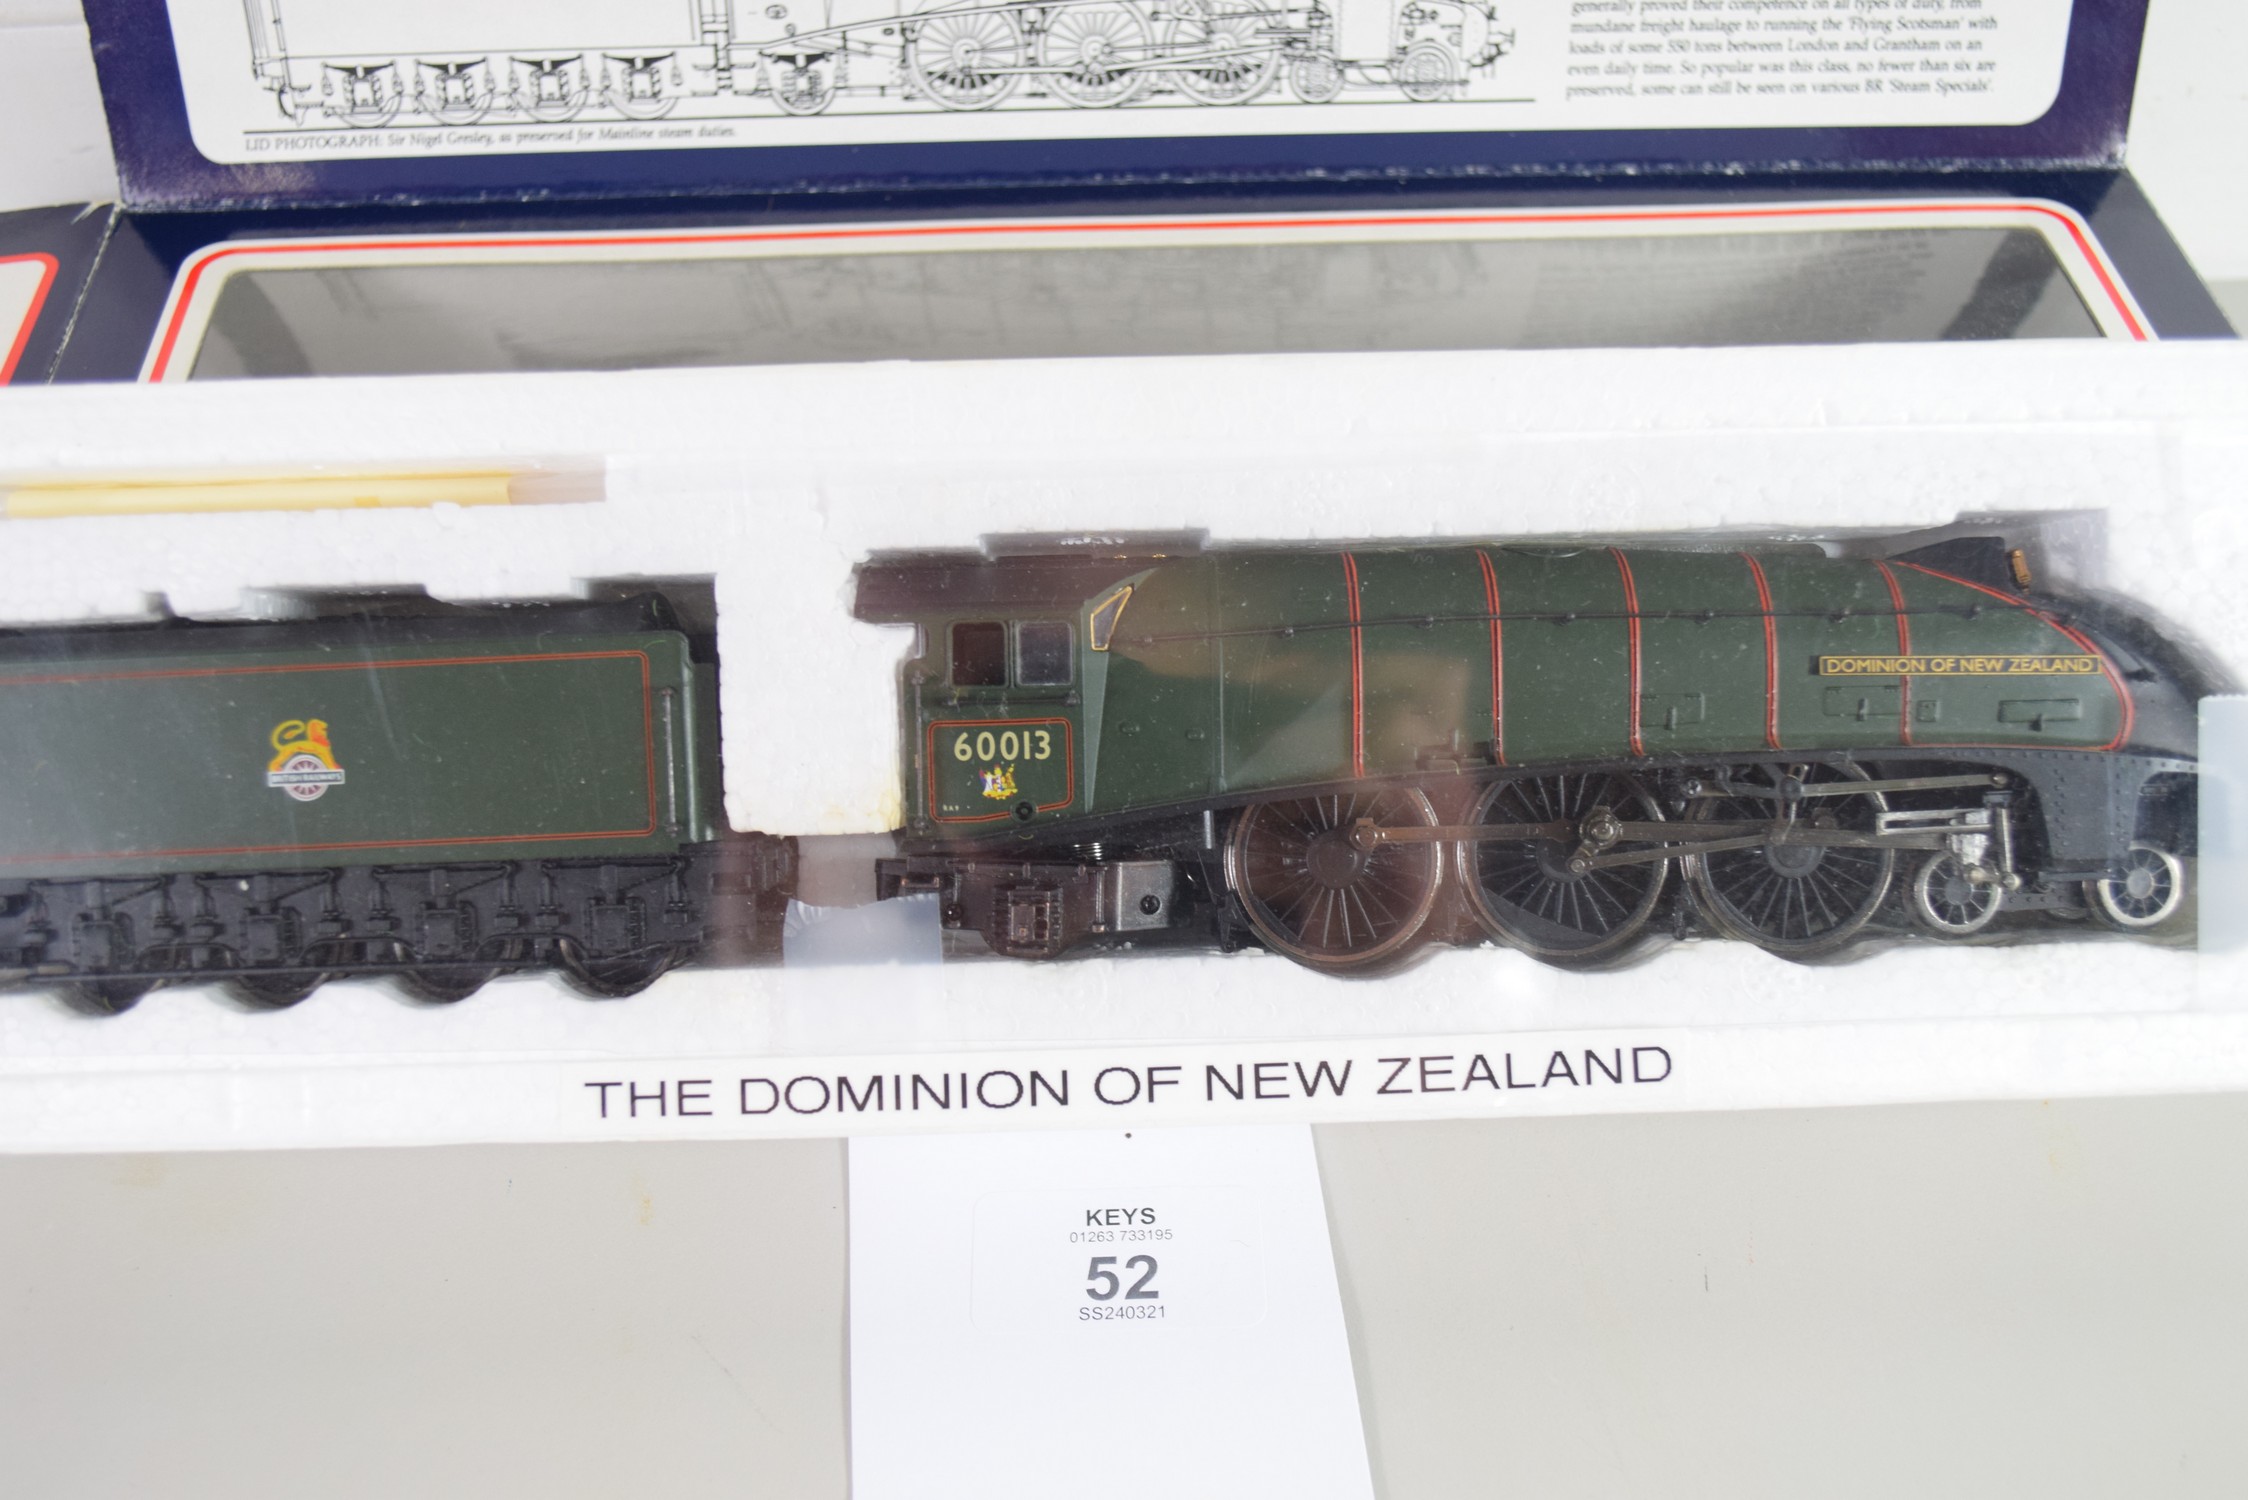 Boxed Bachmann 00 gauge 31-955 A4 "Dominion of New Zealand", BR green, early emblem, No 60013 - Image 3 of 3